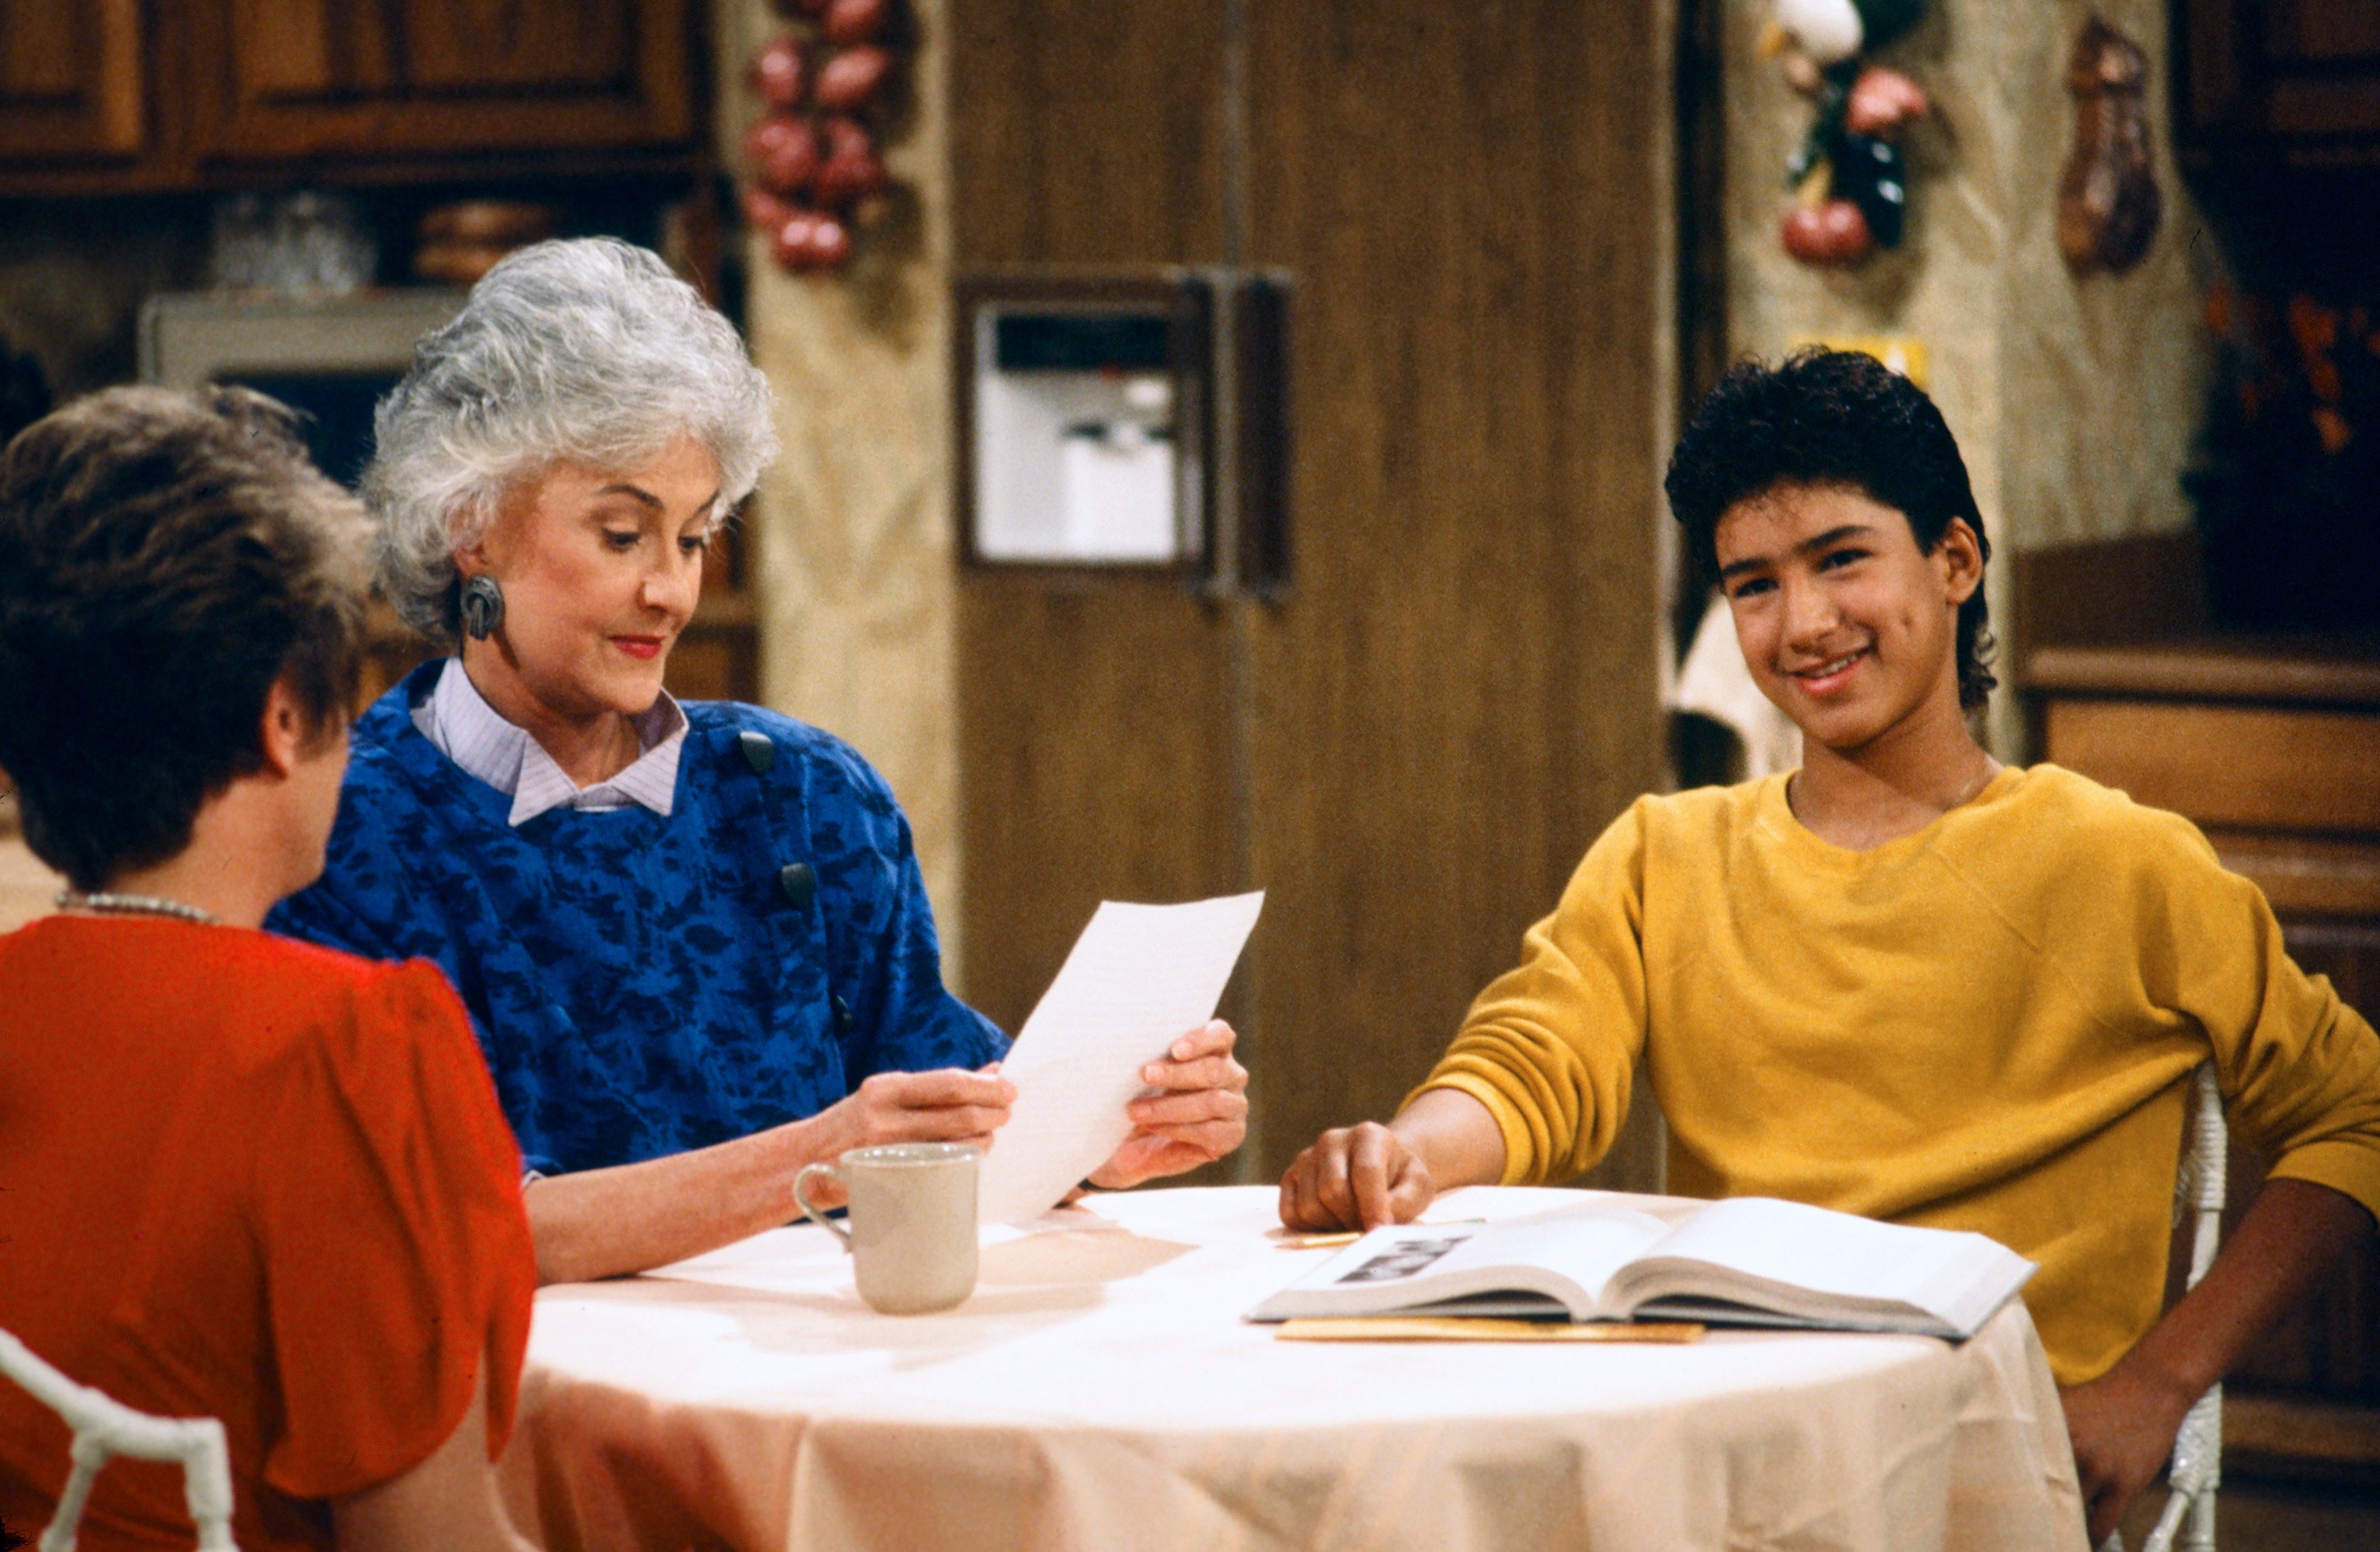 Rue McClanahan as Blanche Devereaux, Bea Arthur as Dorothy Zbornak and Mario Lopez as Mario in the kitchen in an episode of 'The Golden Girls'